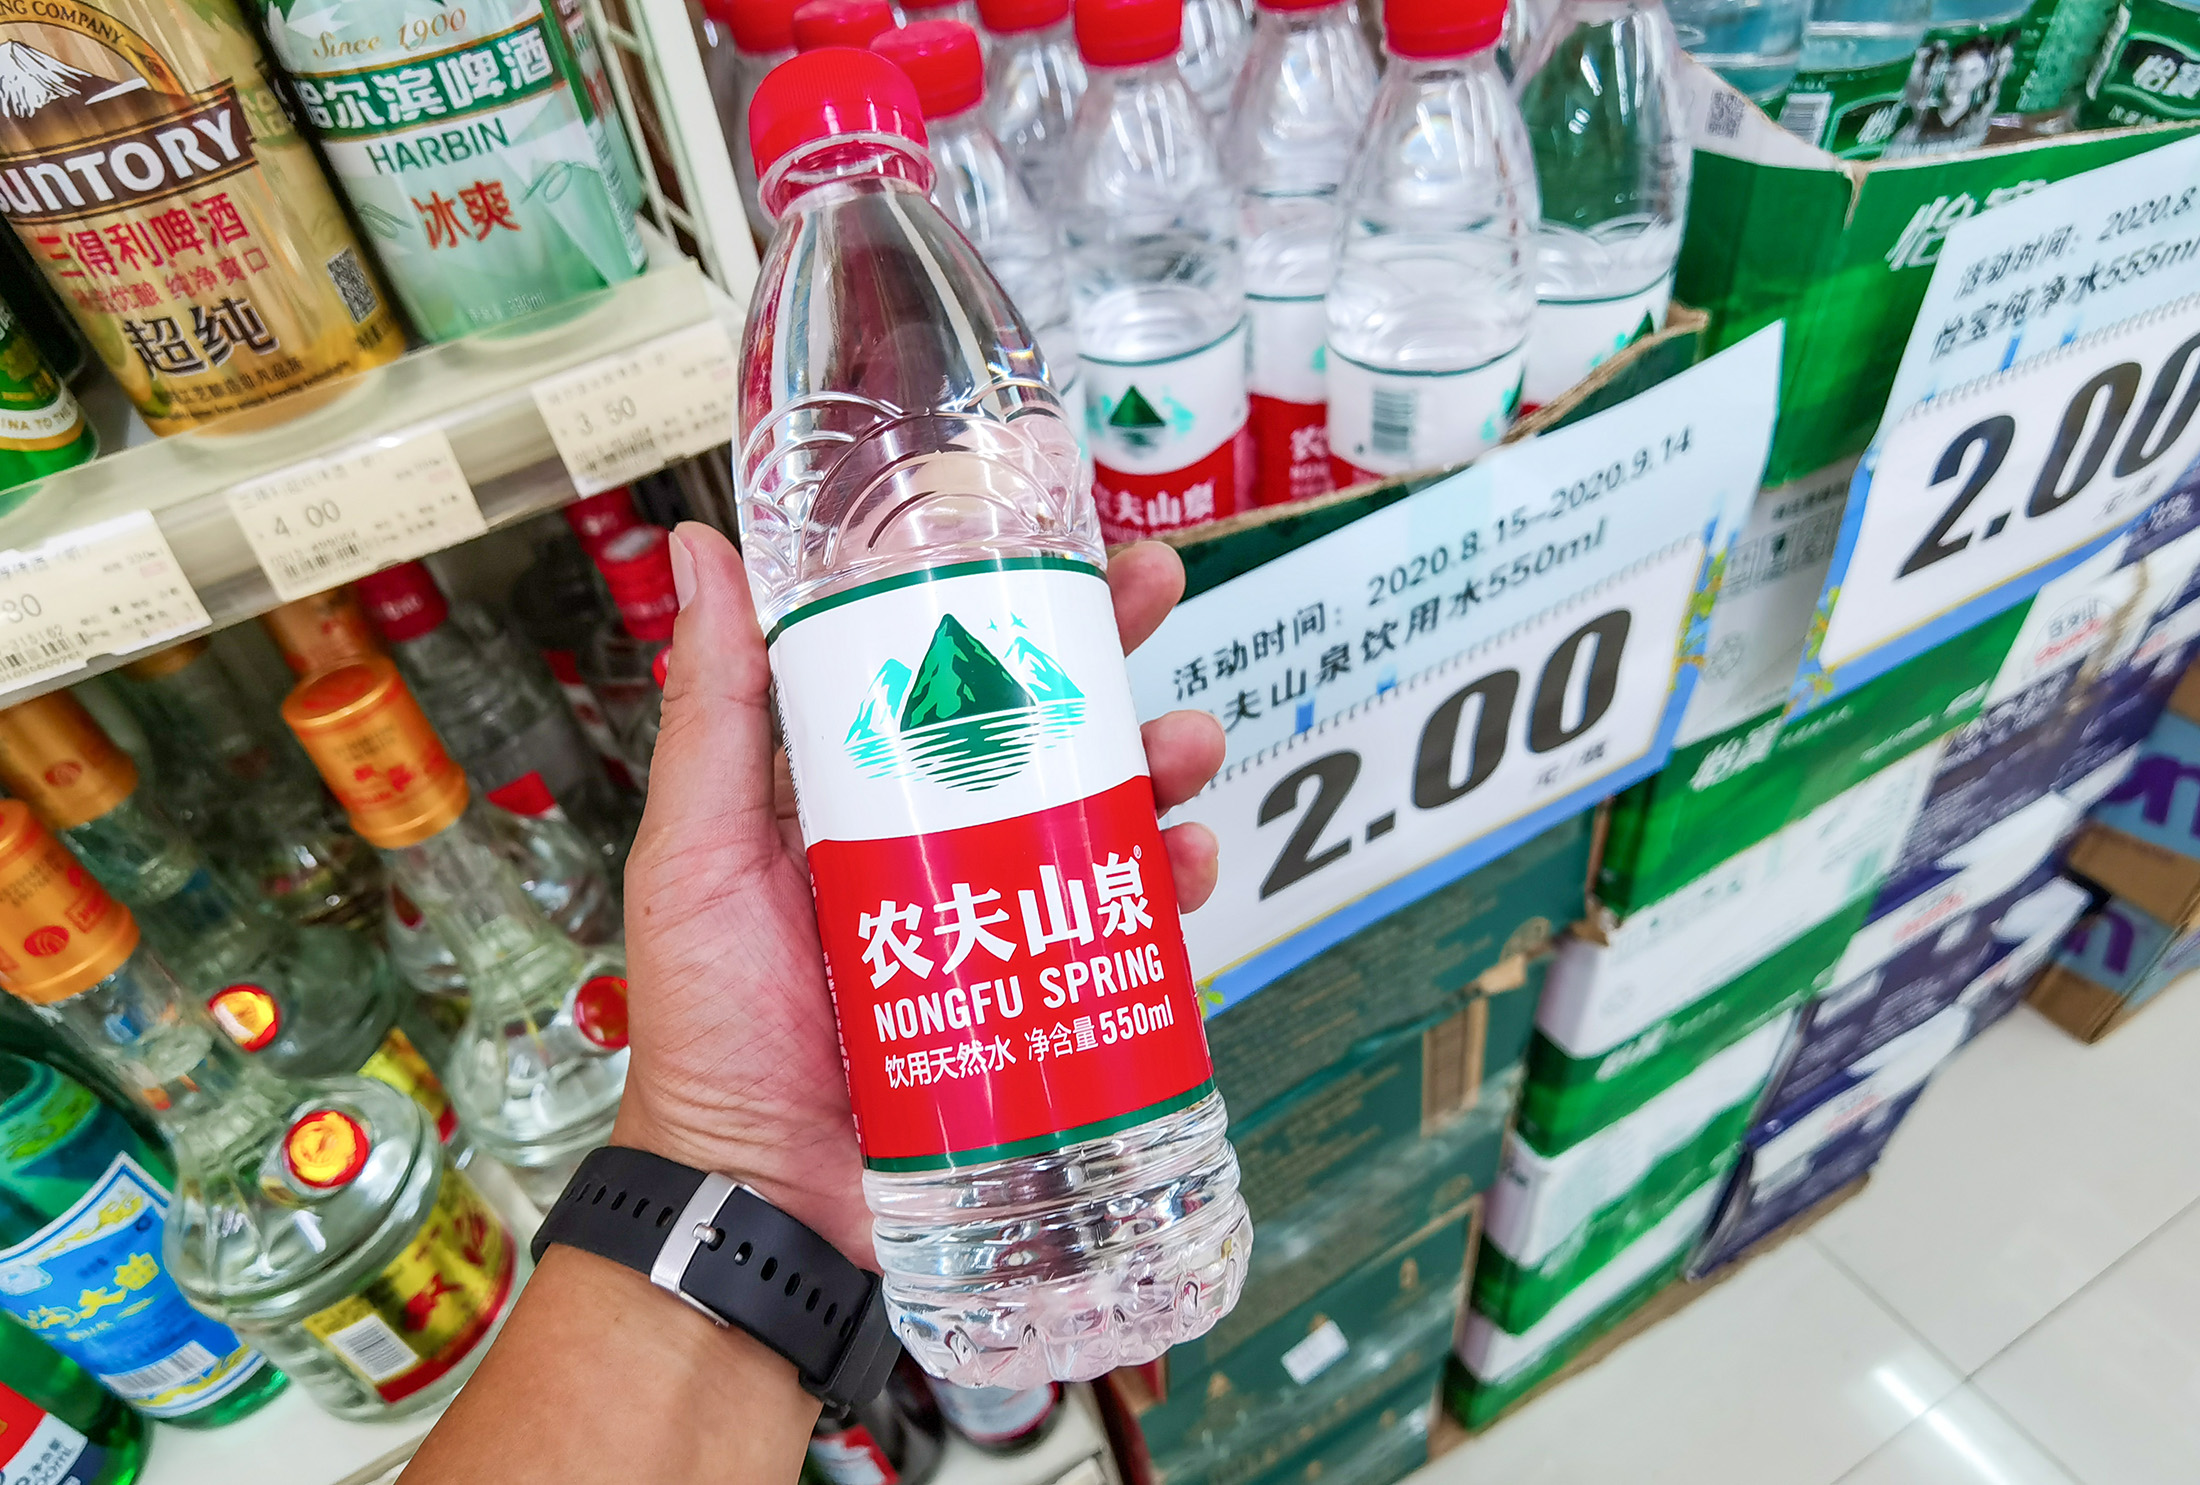 Nongfu Spring is China’s biggest bottled water brand.